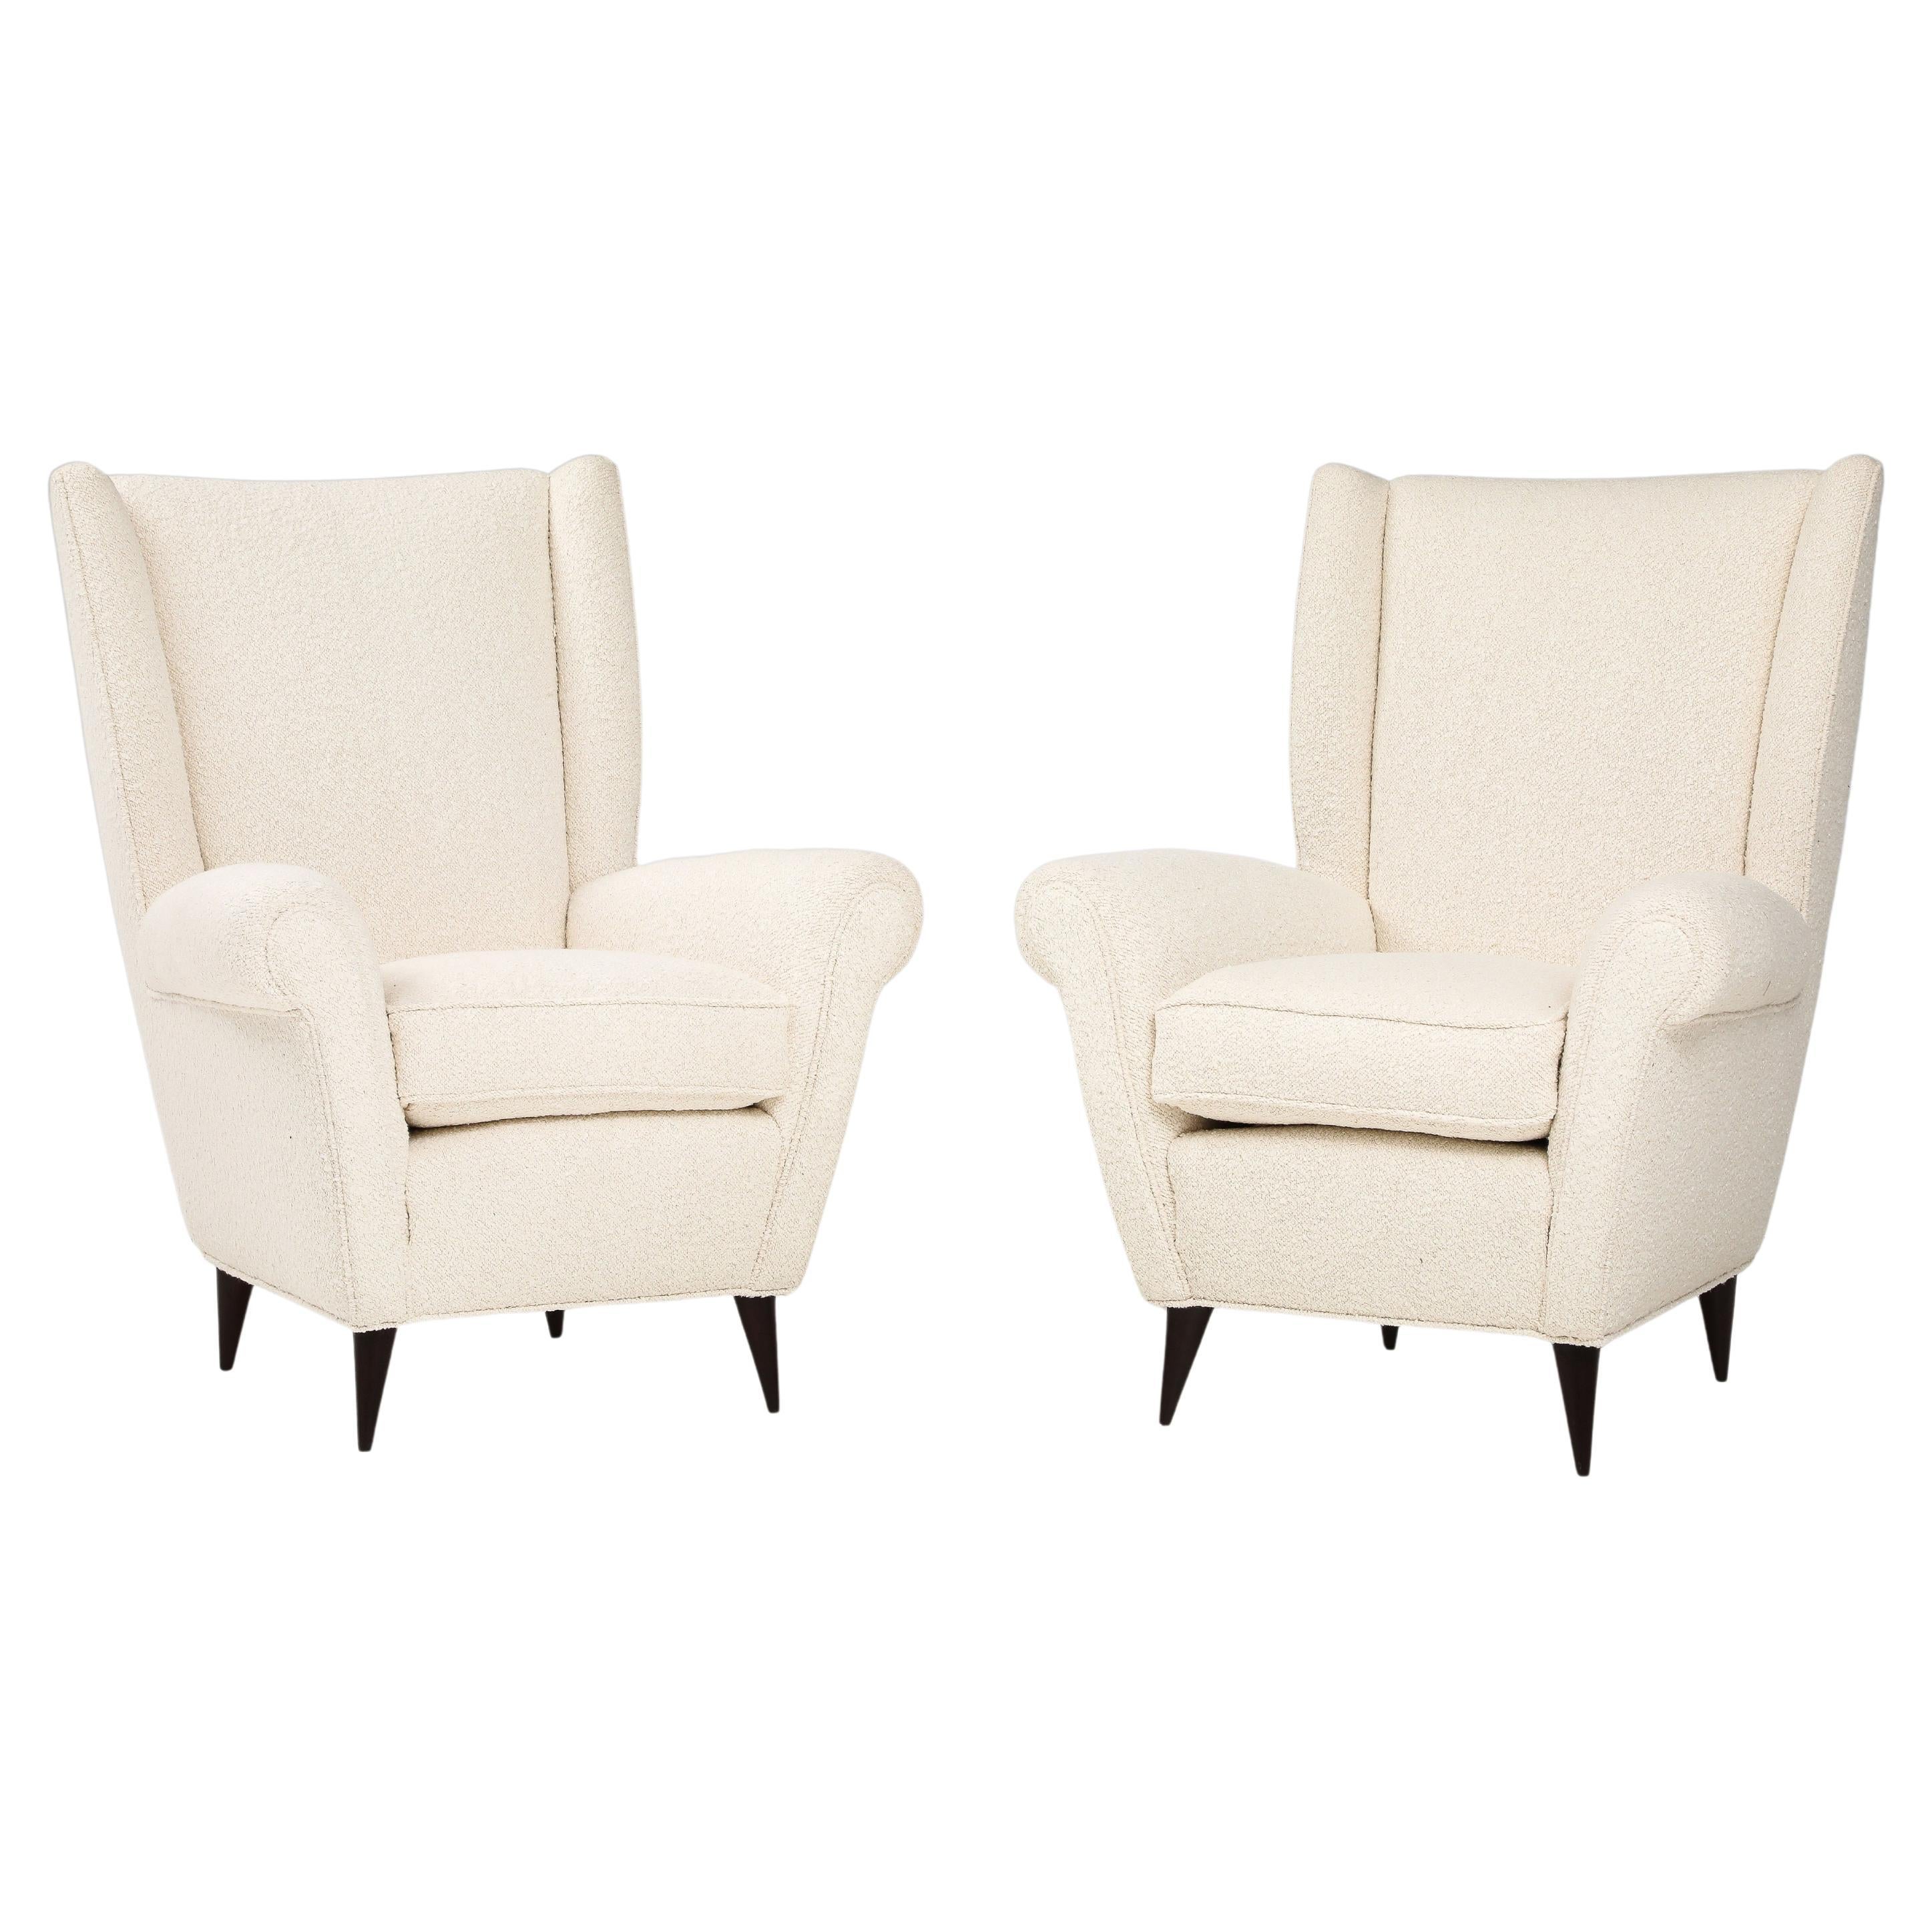 Gio Ponti Pair of High Back Armchairs in Ivory Bouclé, 1950s For Sale